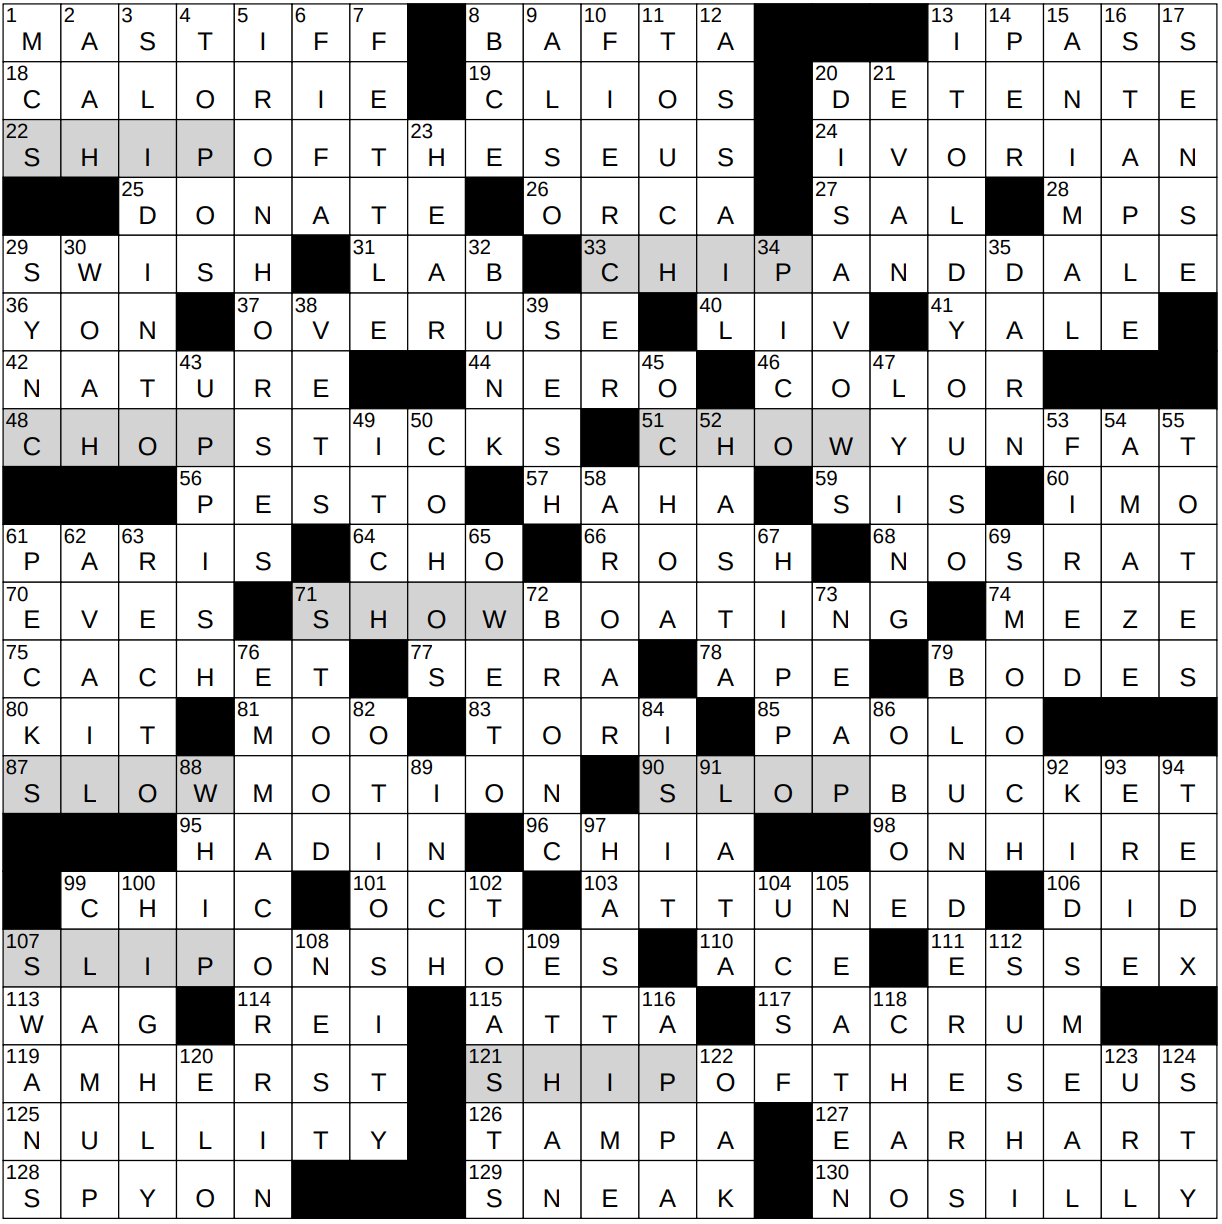 Brand's Crossword Game King's Cup - Wikipedia